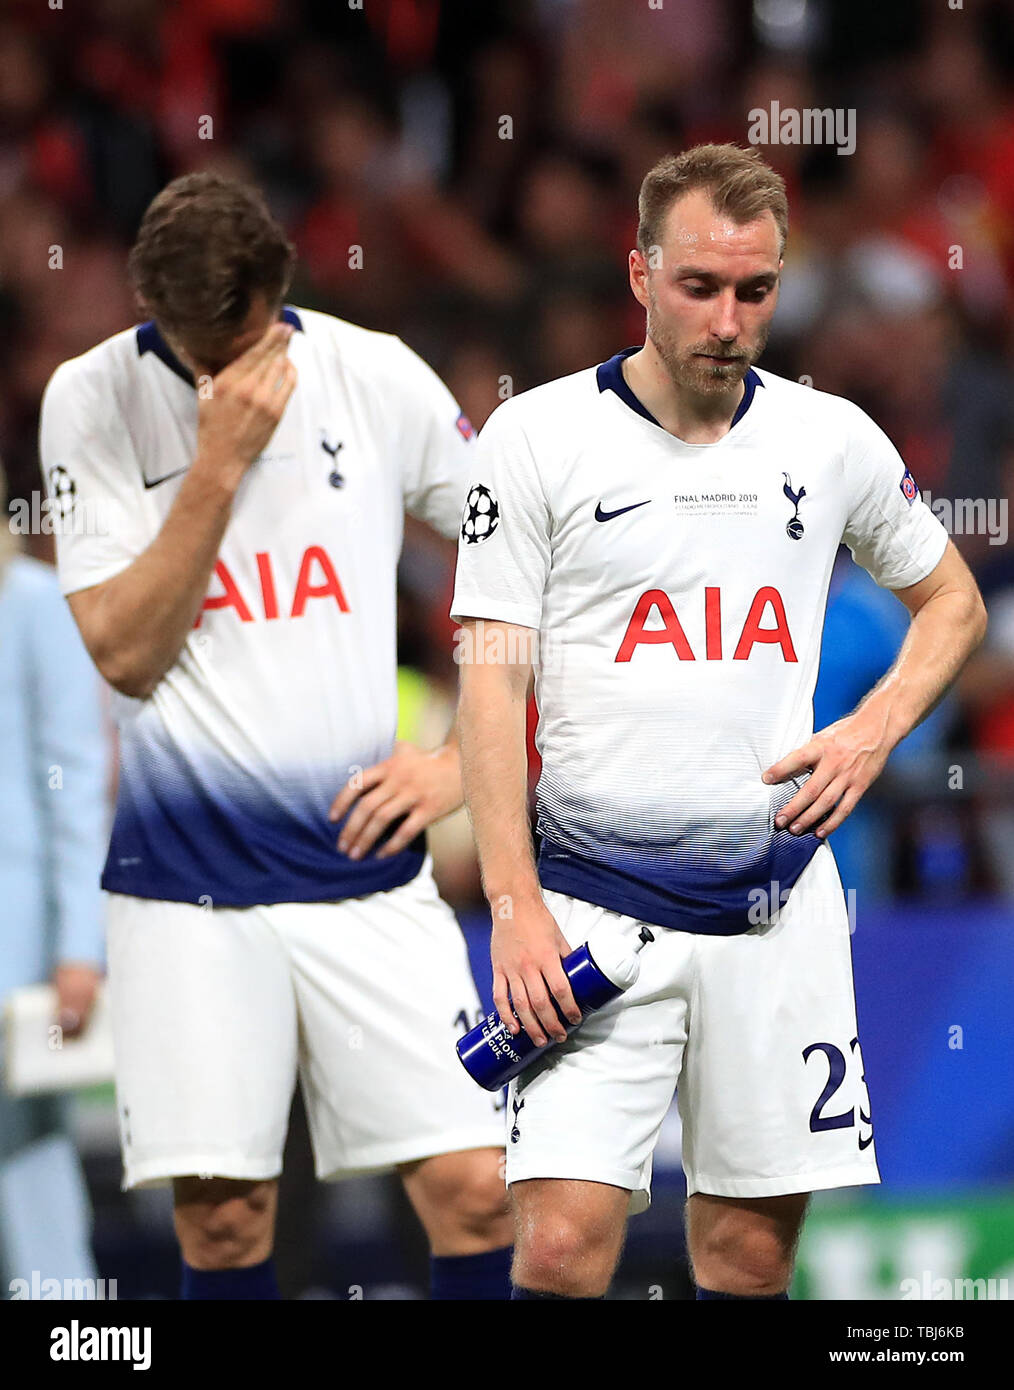 Tottenham Hotspur's Fernando Llorente and Christian Eriksen reacts after the final whistle during the UEFA Champions League Final at the Wanda Metropolitano, Madrid. Stock Photo